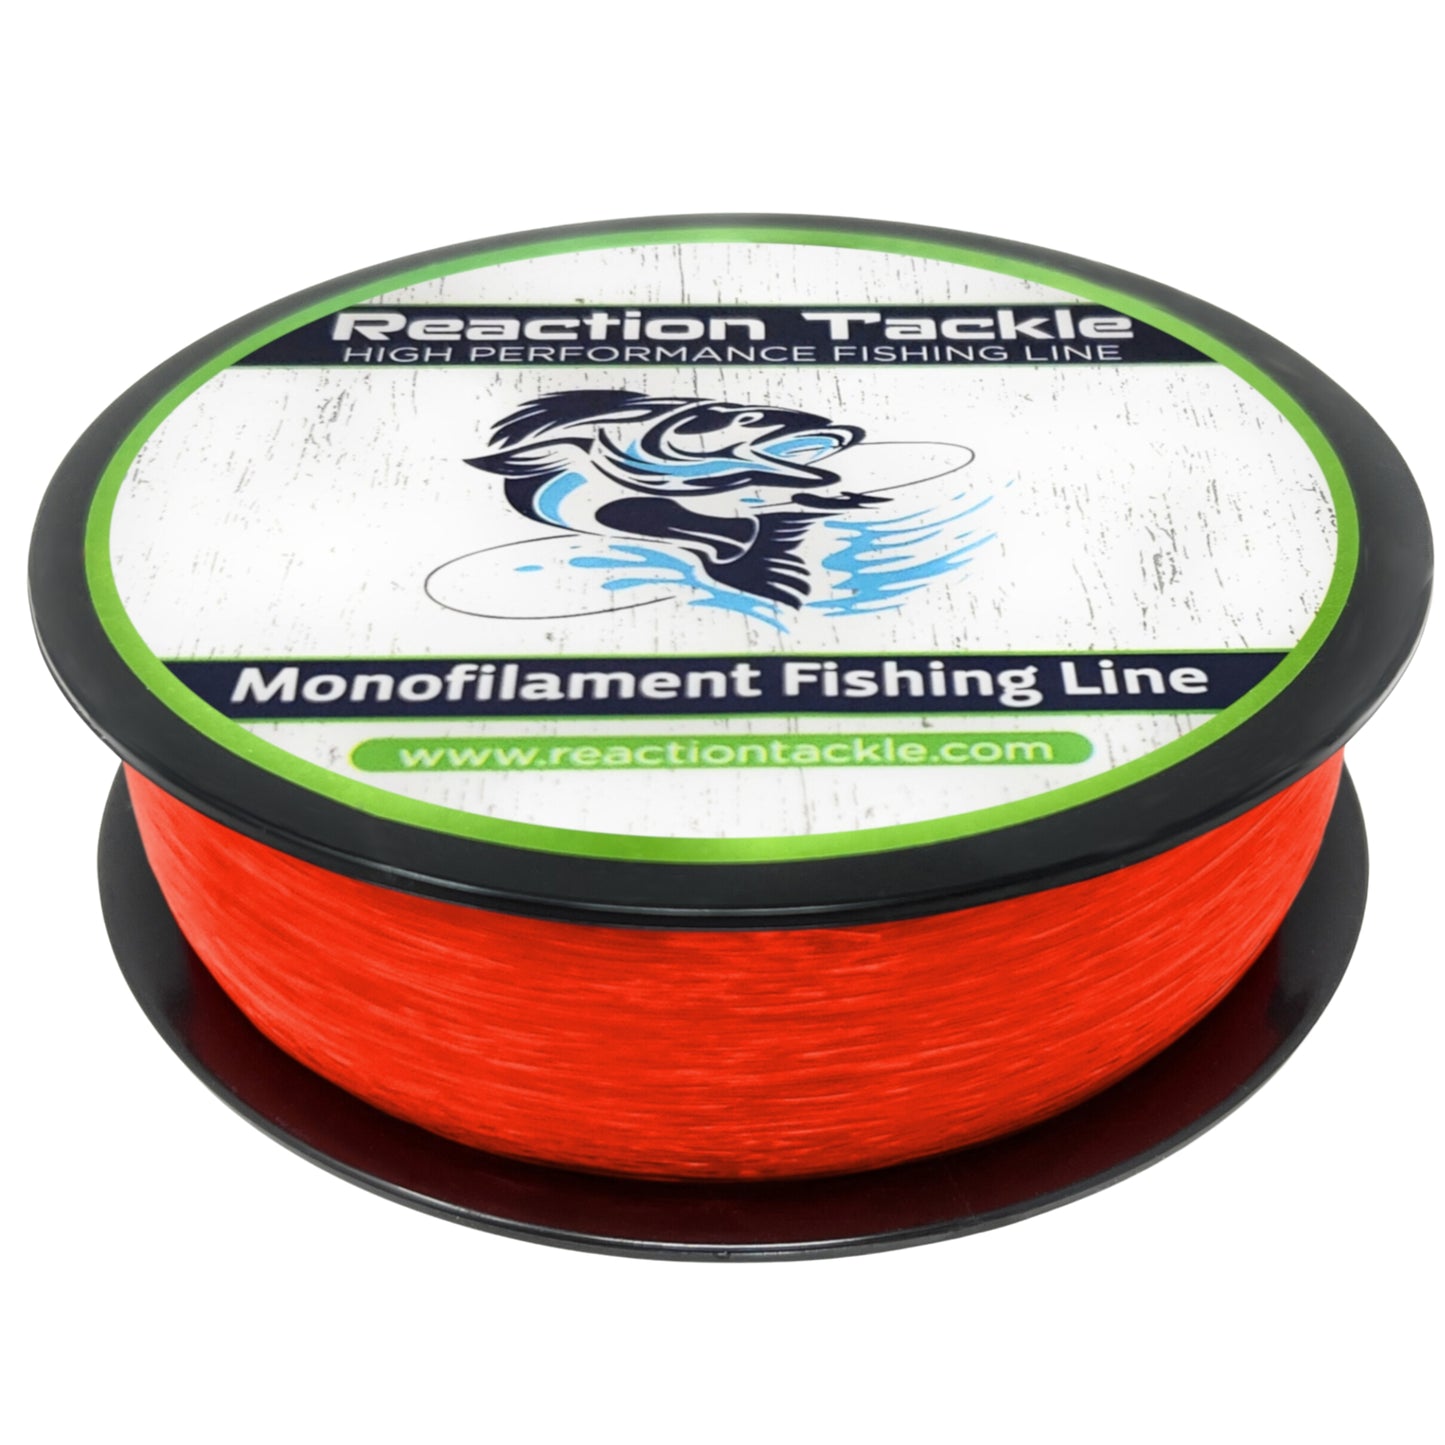 REACTION TACKLE Ice Monofilament Fishing Line- Tip Ups and Ice Fishing, Mono